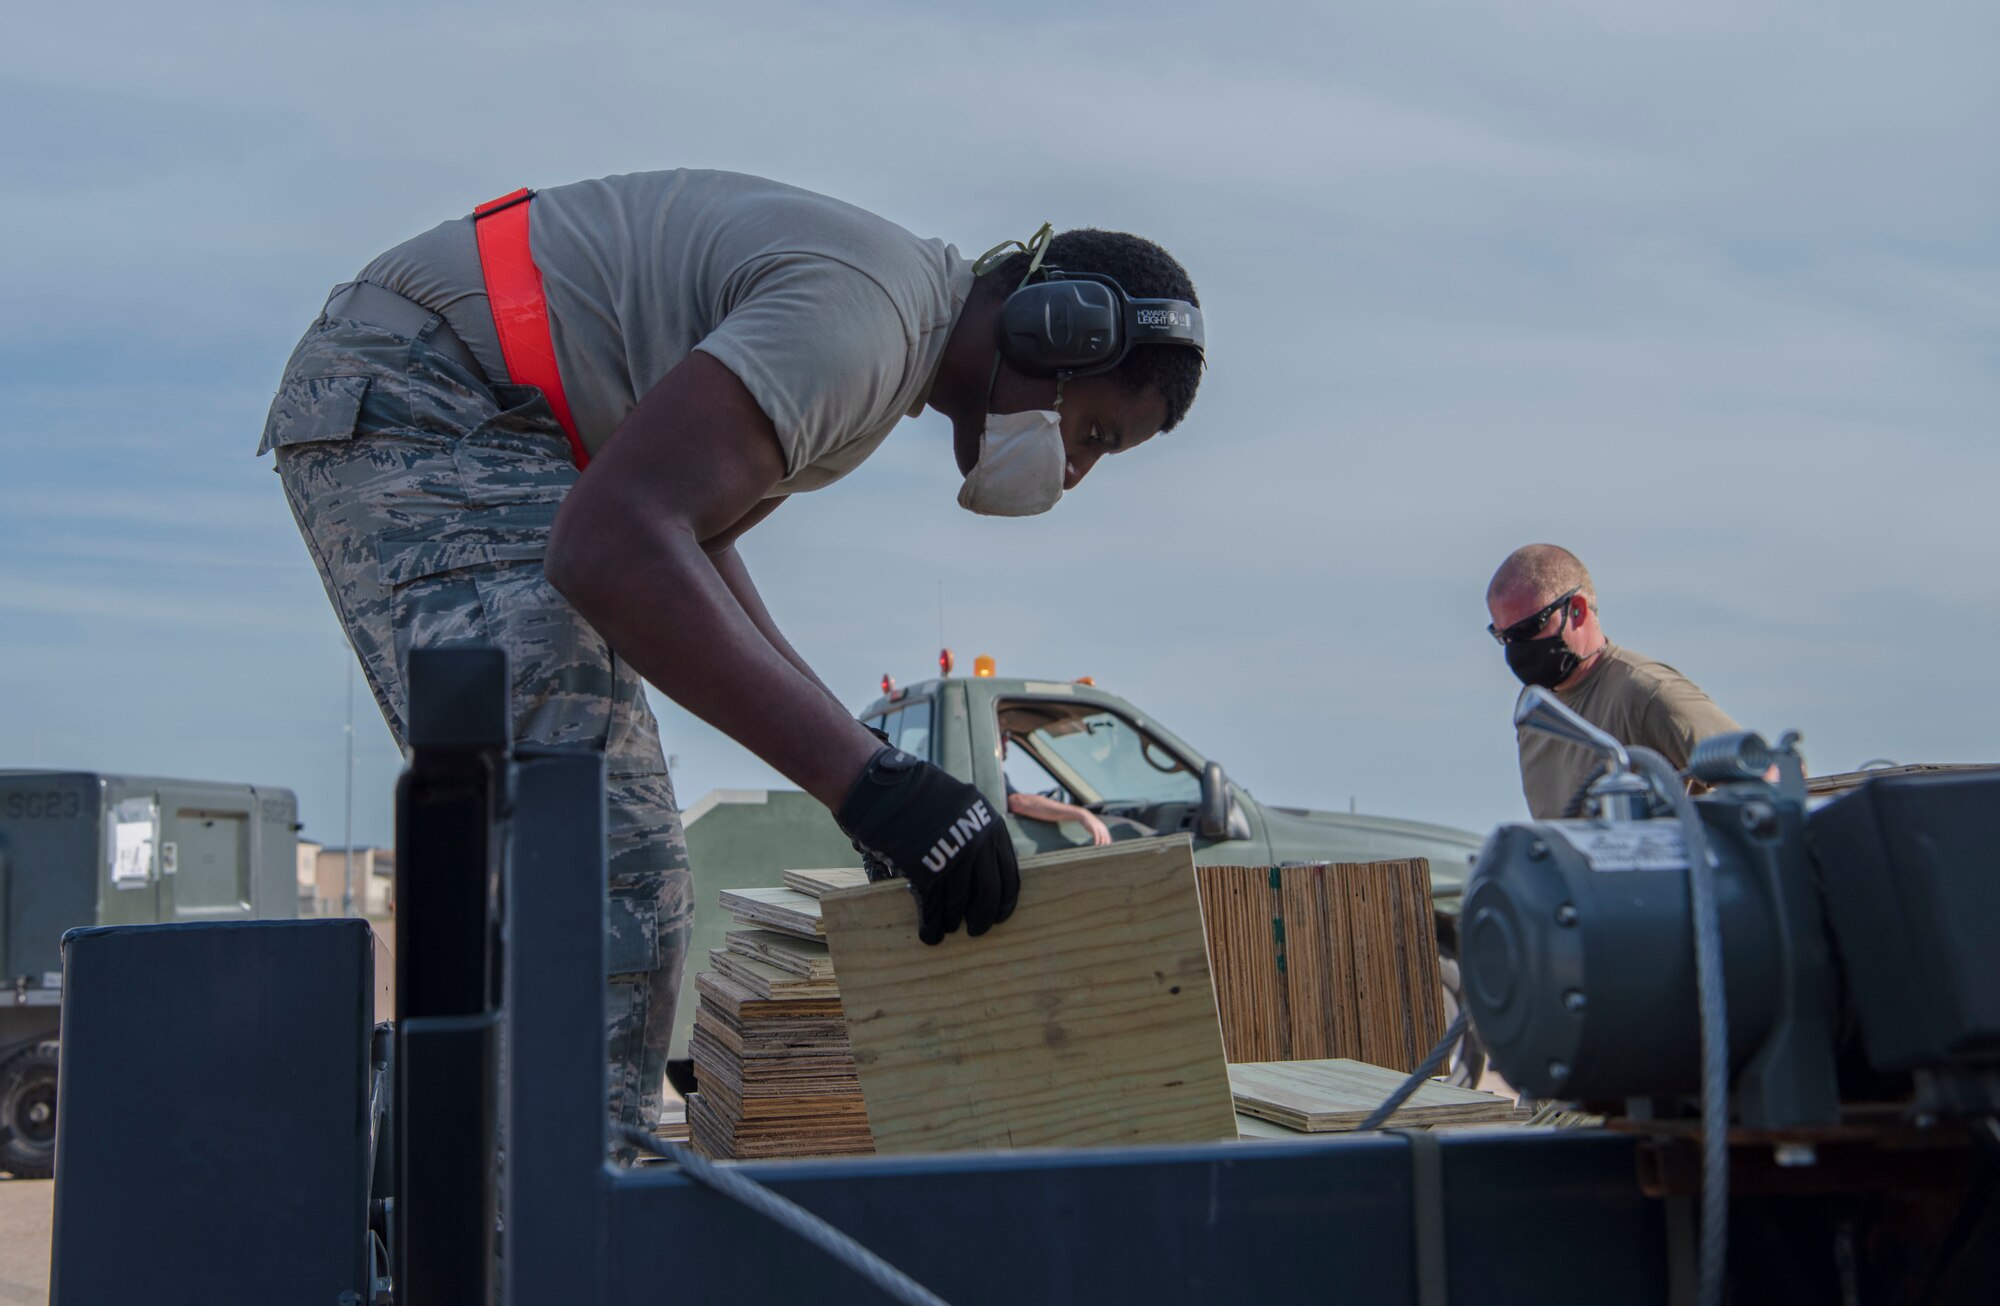 Airman 1st Class Keyshawn Jeanty (left), 7th Equipment Maintenance Squadron, prepares wooden shoring to stabilize cargo in an aircraft during flight at Dyess Air Force Base, Texas, April 27, 2020. A C-5 Galaxy assigned to Dover AFB, Delaware, transported Bomber Task Force equipment for four B-1B Lancers and approximately 200 Airmen to Andersen AFB, Guam. The BTF supports Pacific Air Forces' training efforts with allies, partners and joint forces; and strategic deterrence mission to reinforce the rules-based international order in the Indo-Pacific region (U.S. Air Force photo by Airman 1st Class Nicole Molignano)